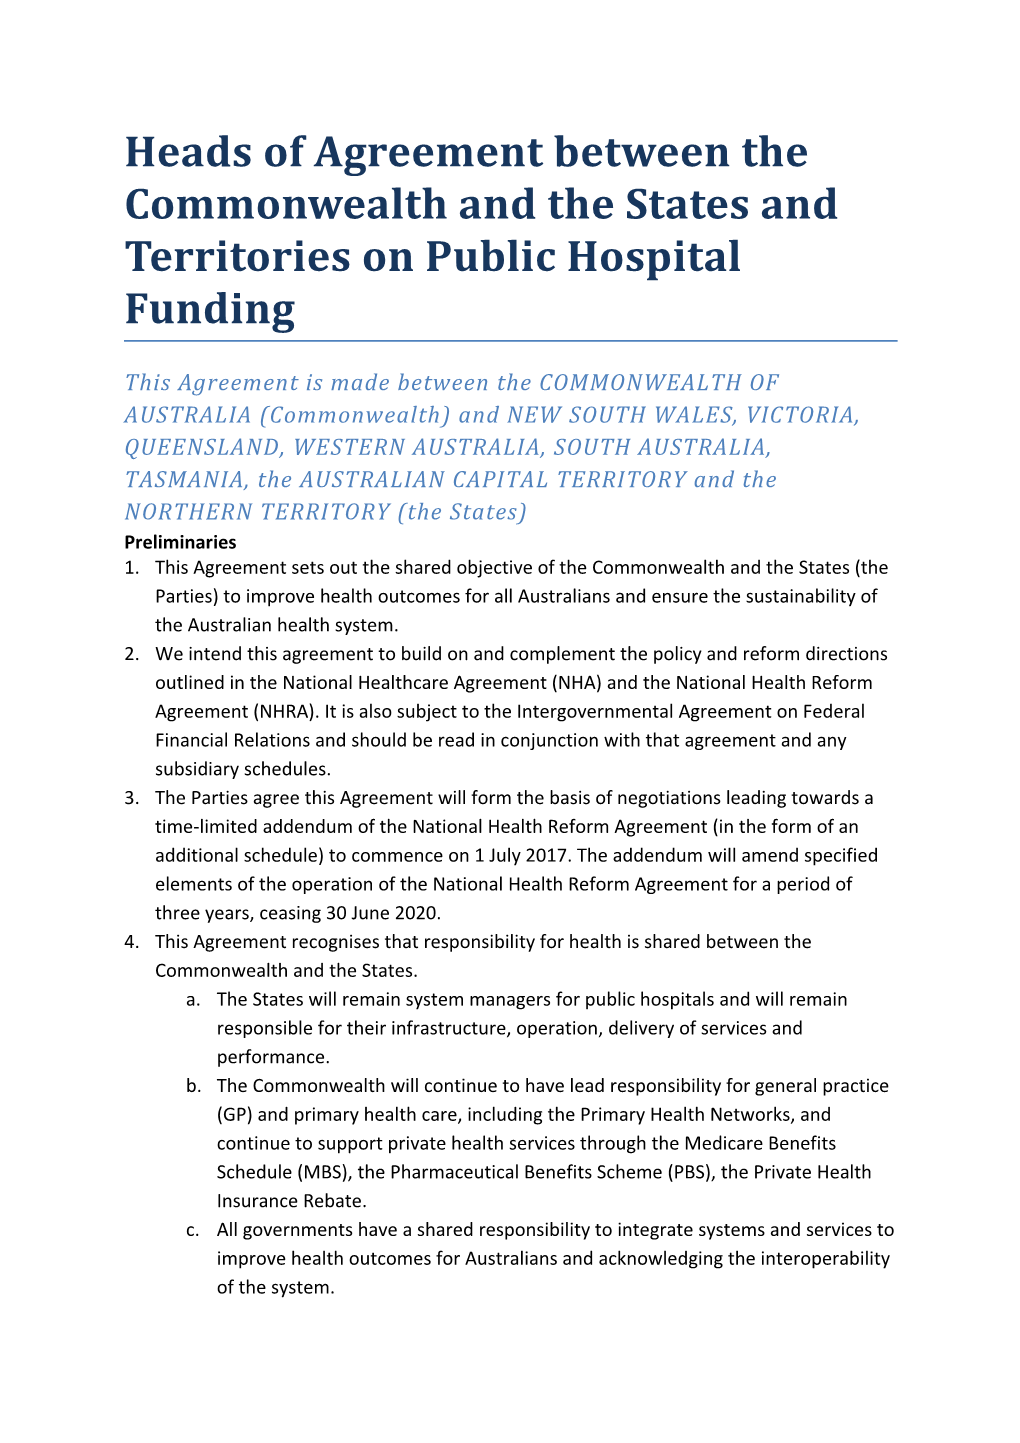 Heads of Agreement Between the Commonwealth and the States and Territories on Public Hospital